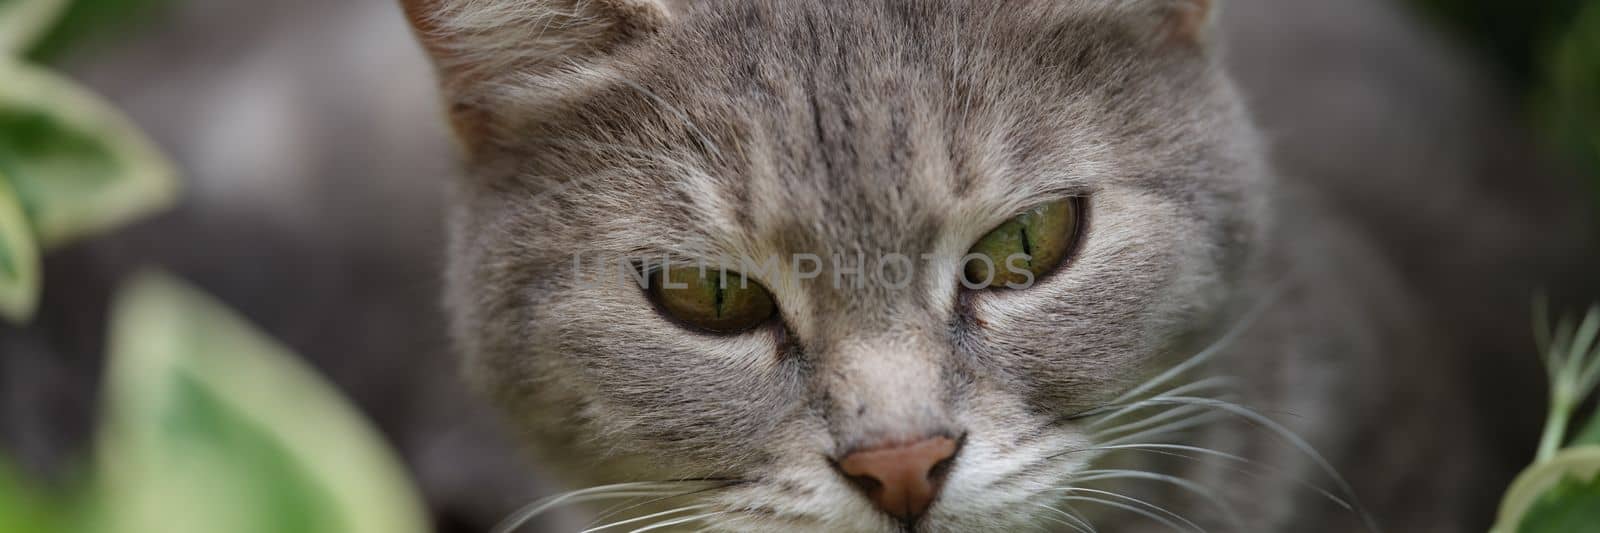 Beautiful gray cat with bright green eyes in grass. Cat walks and hunts in grass